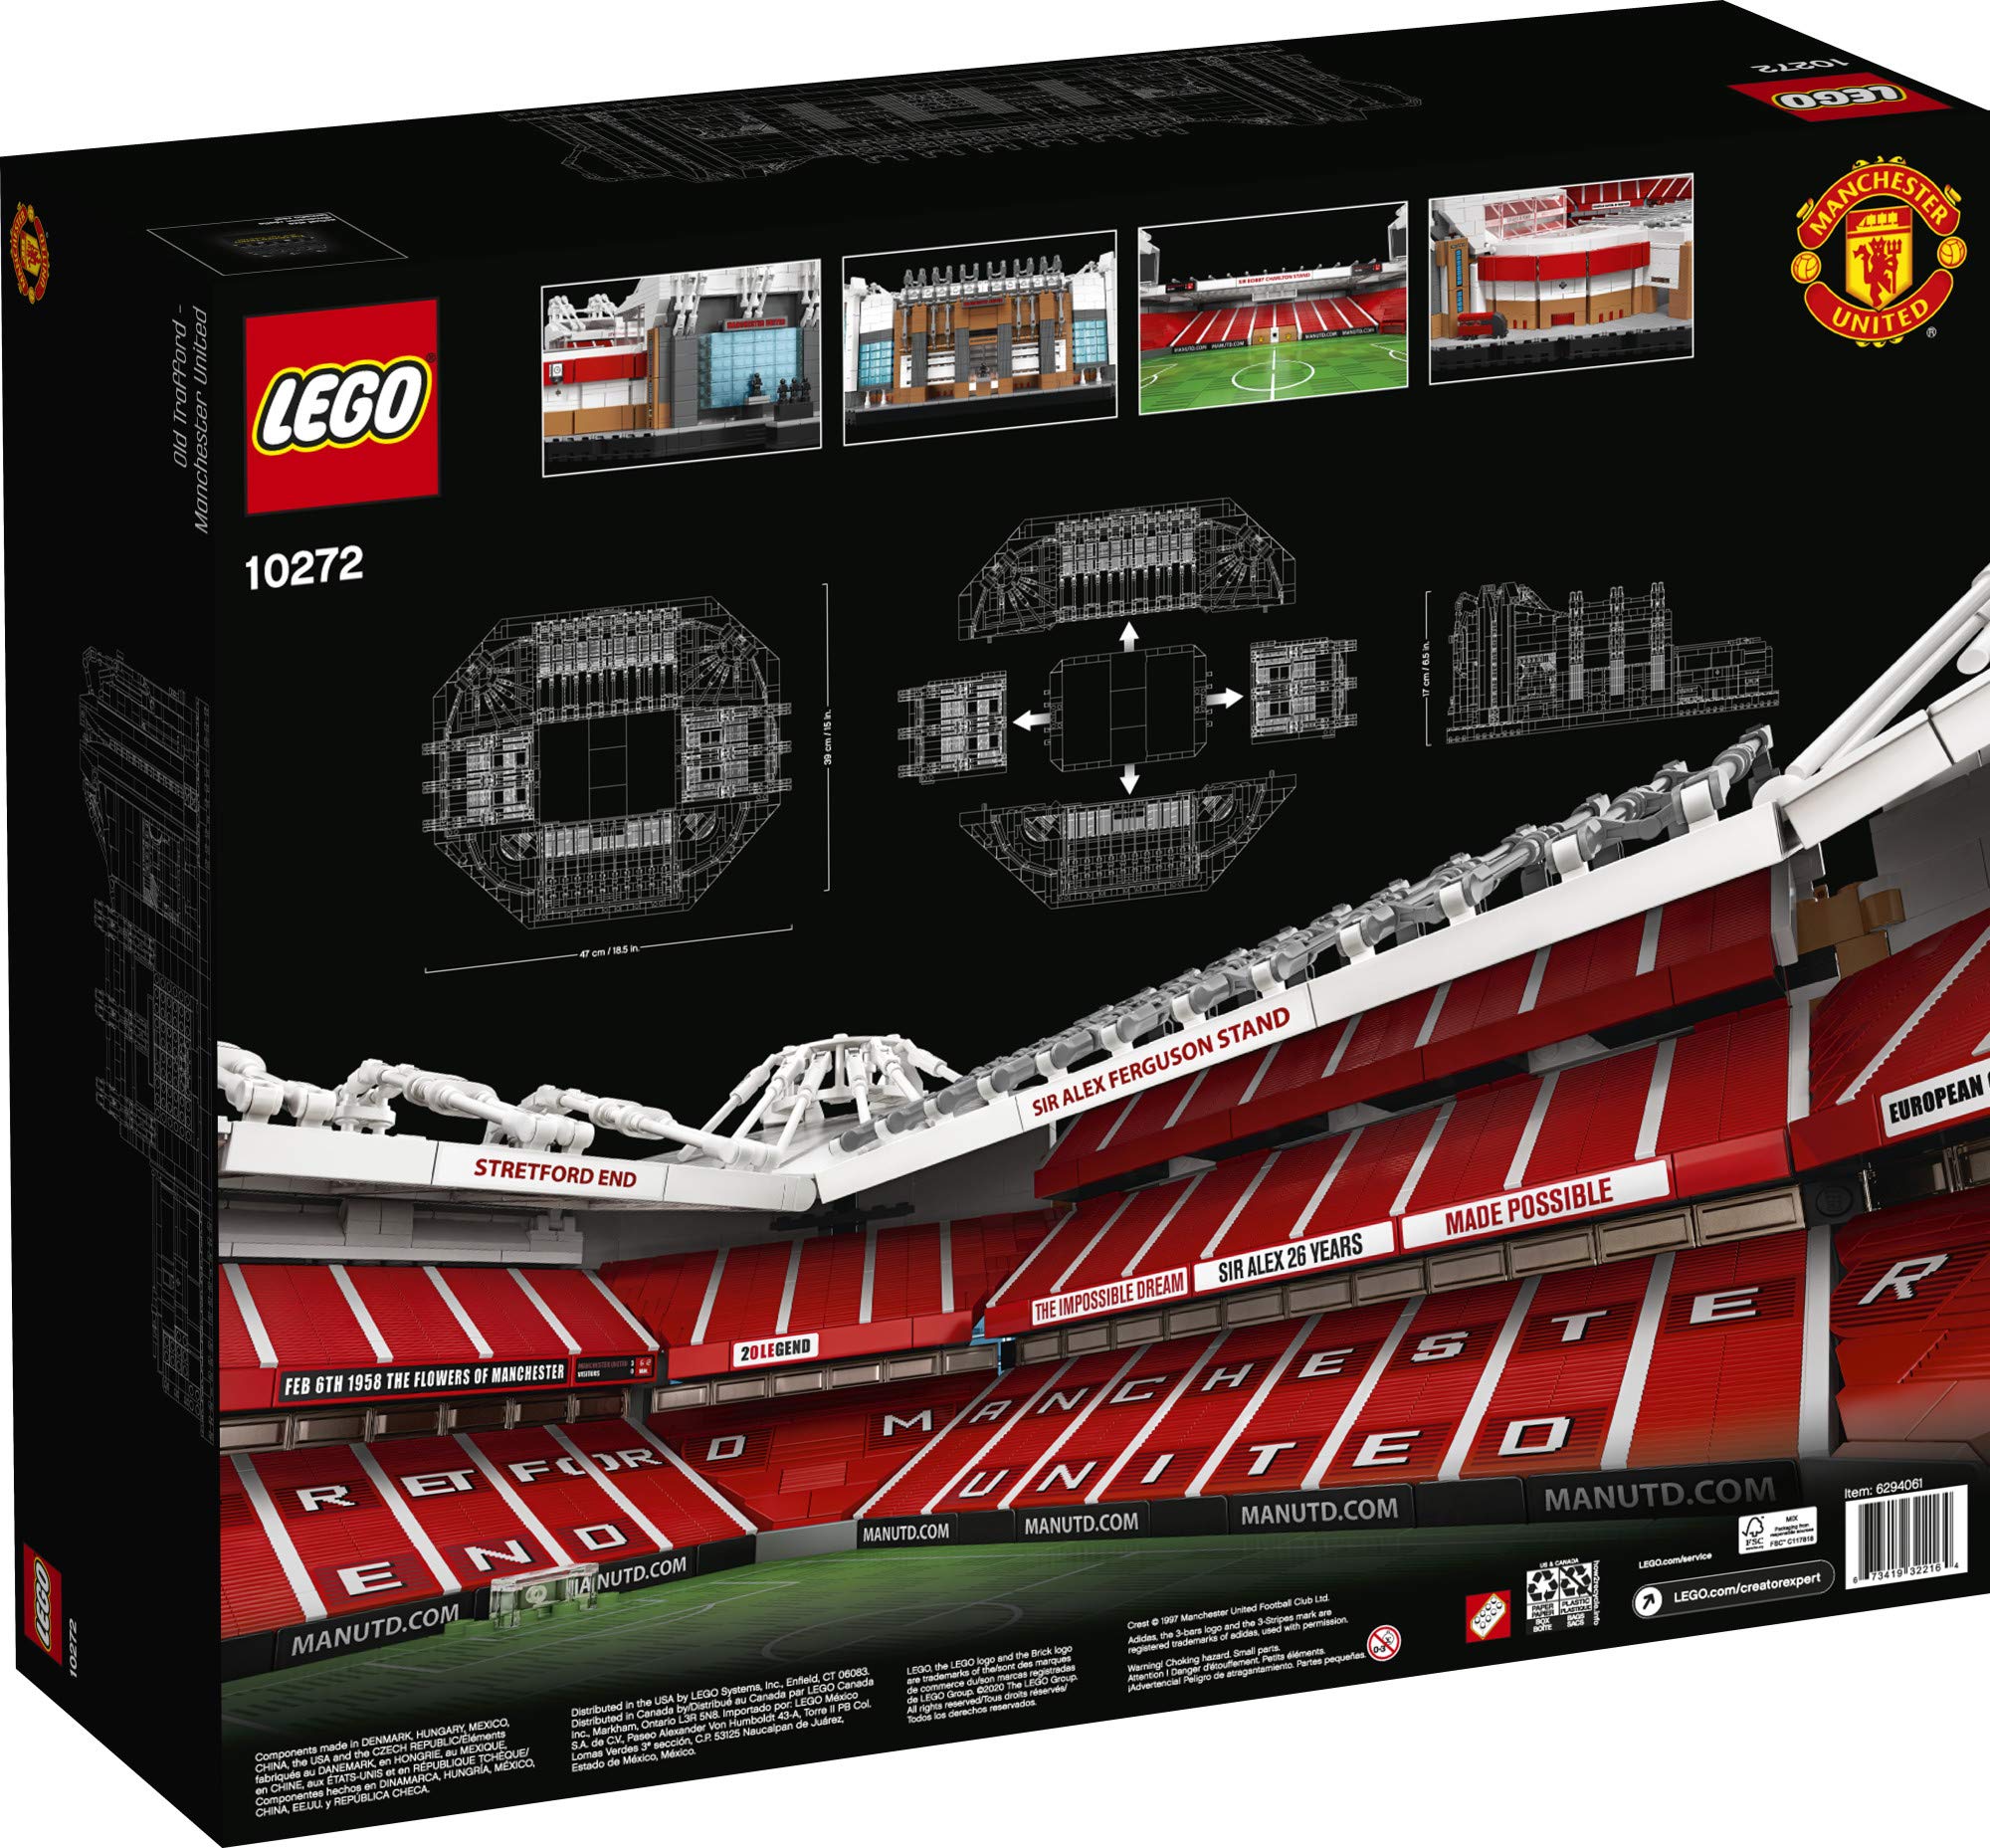 LEGO Creator Expert Old Trafford - Manchester United 10272 Building Kit for Adults and Collector Toy (3,898 Pieces)